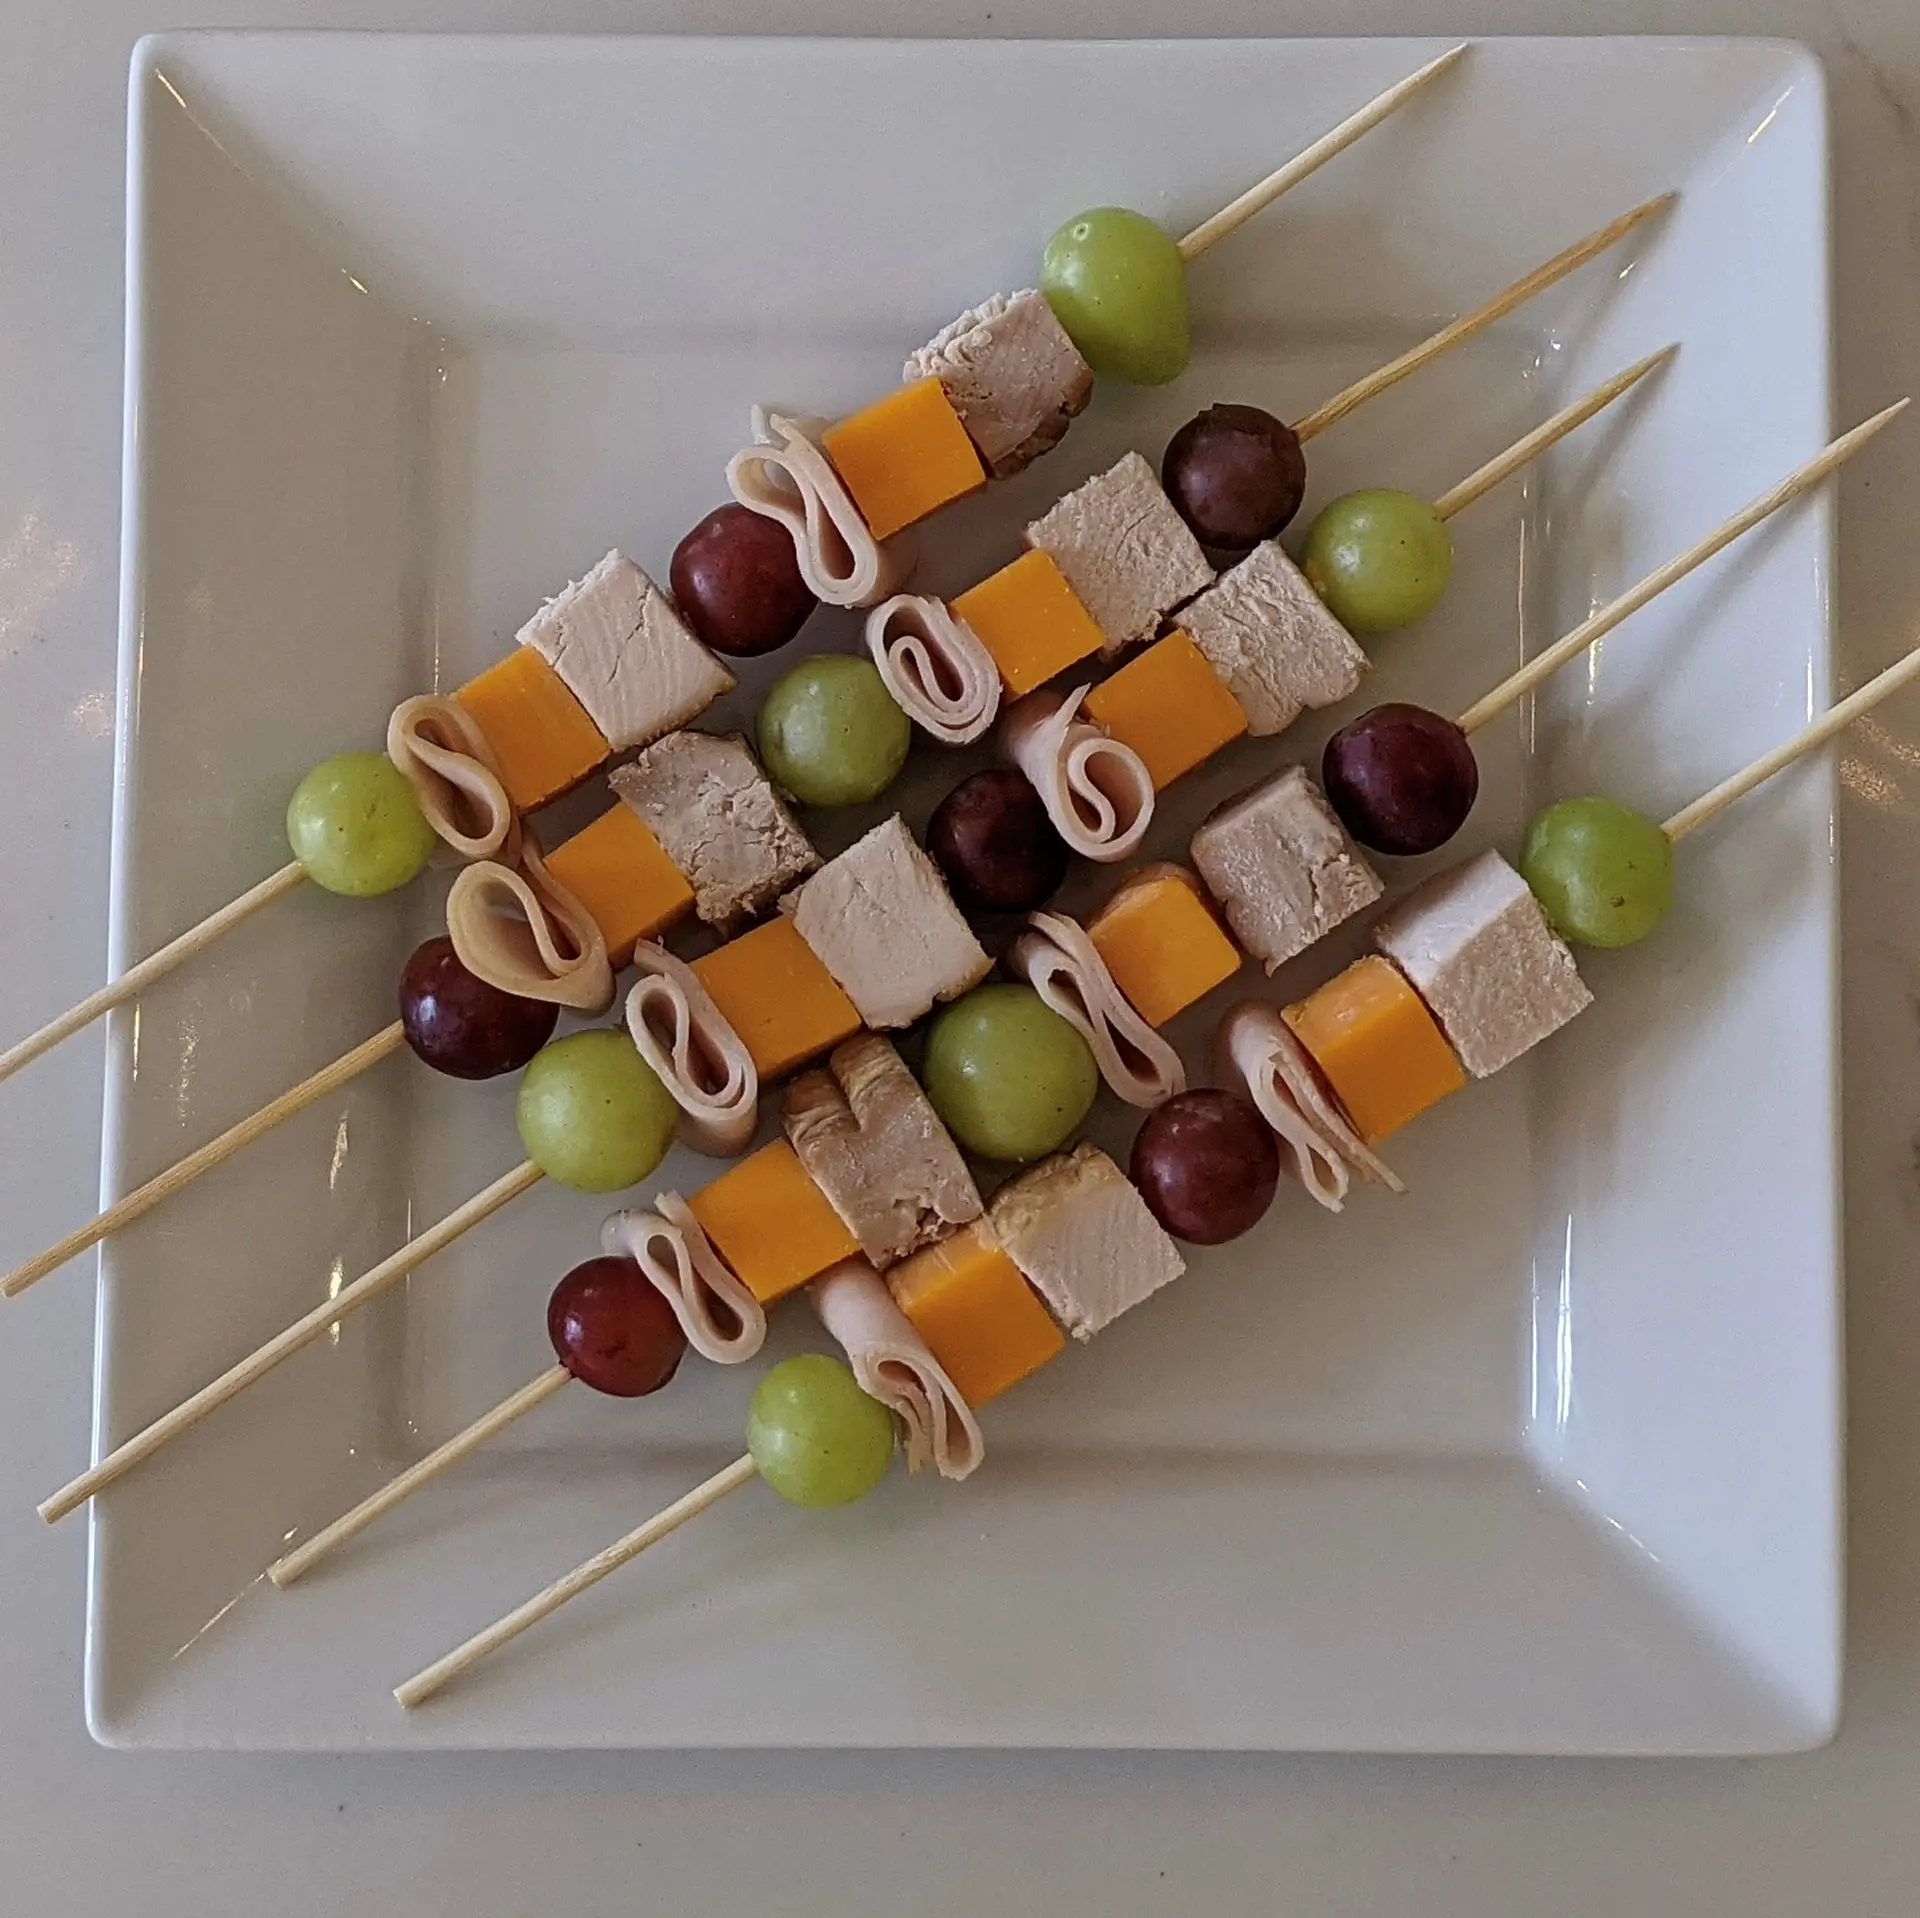 School lunch skewers made with fruits and turkey ham.